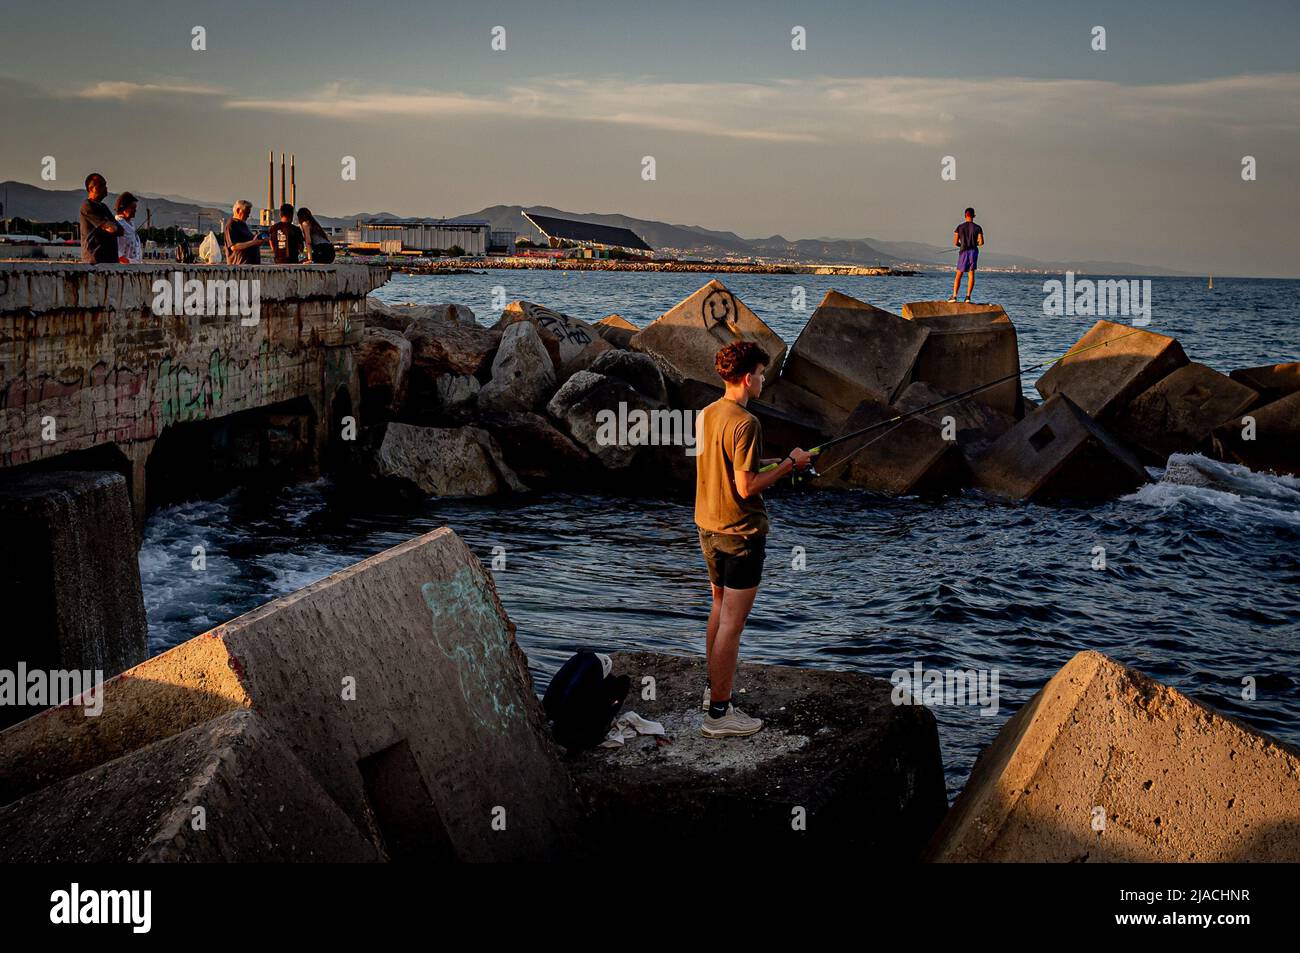 Men fish from a breakwater at sunset in Barcelona. Stock Photo